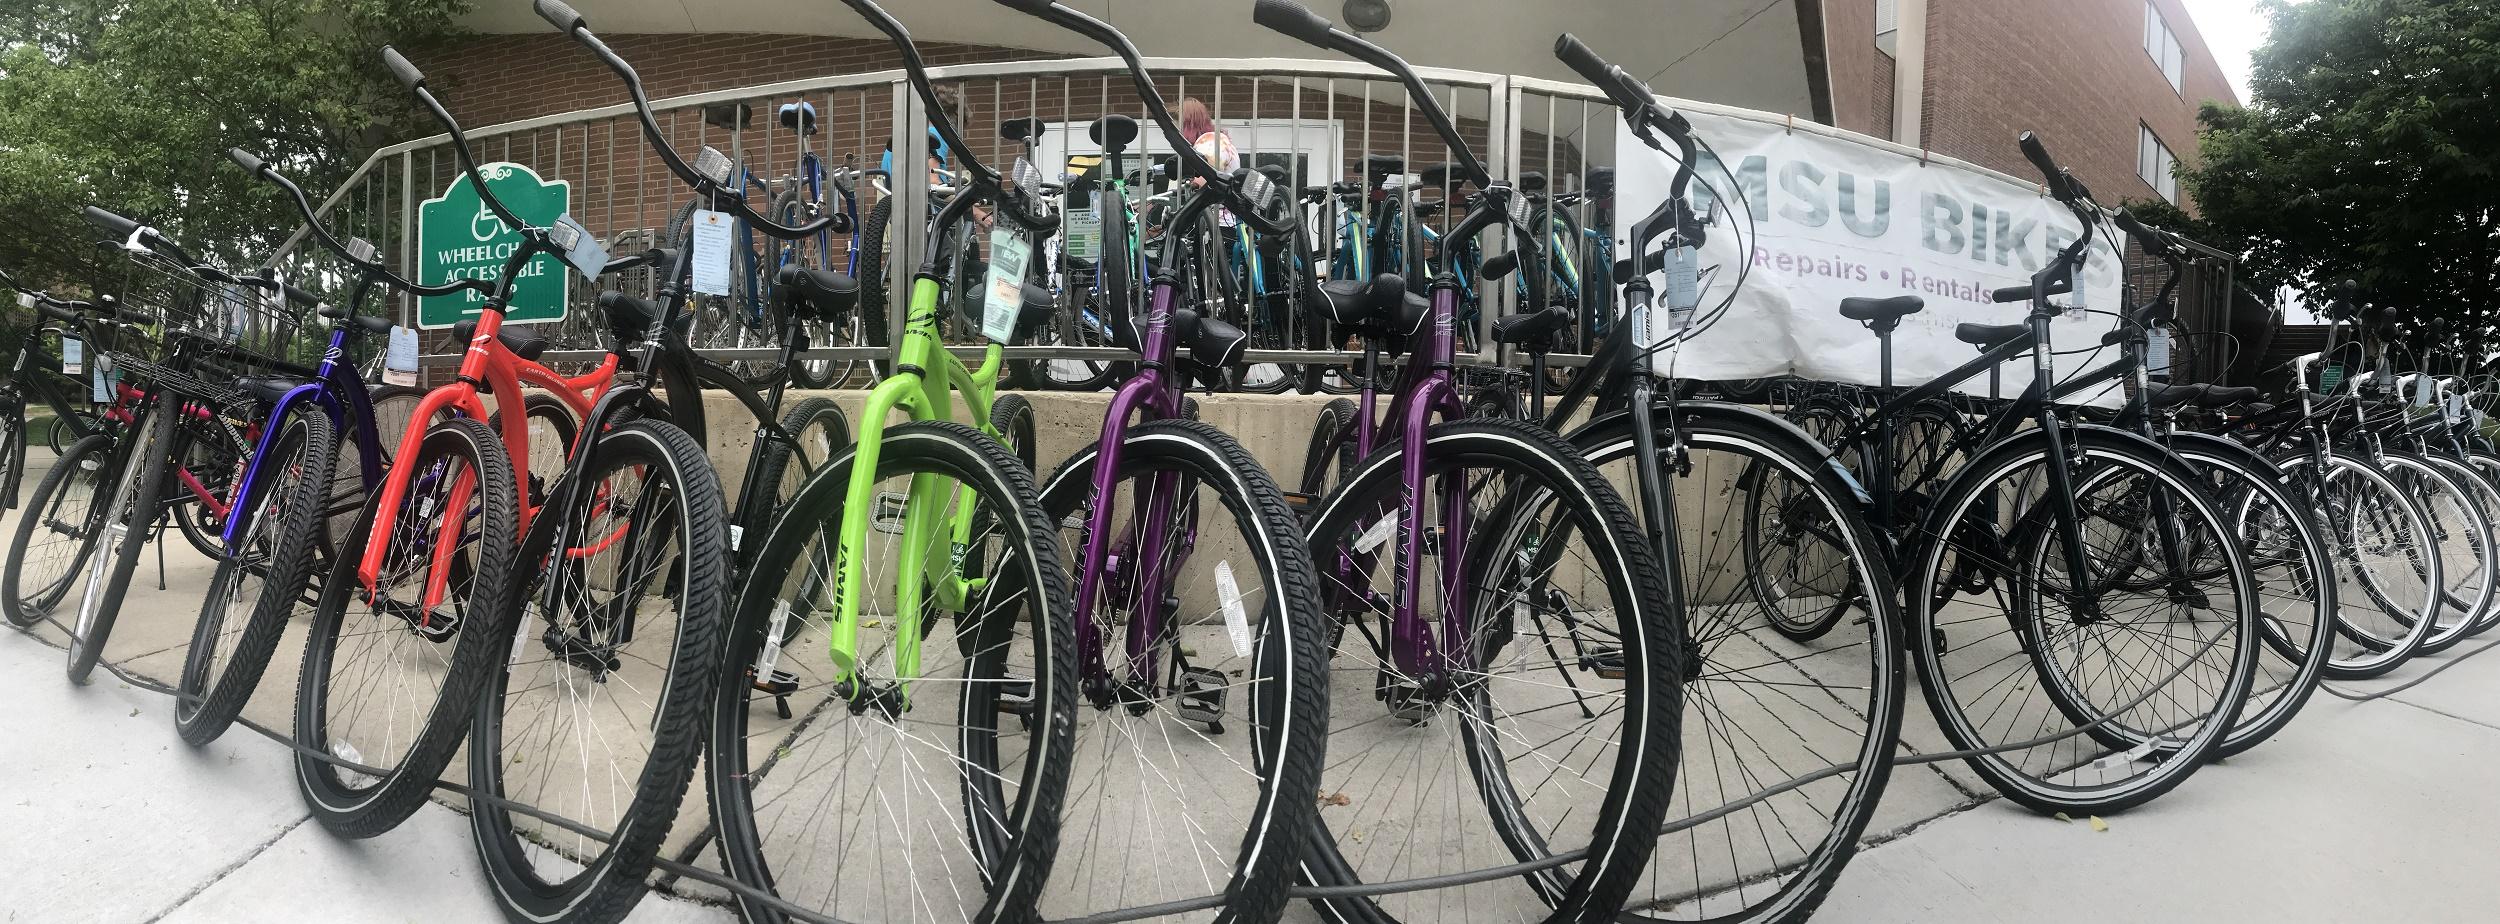 Bikes lined up outside of the MSU Bikes Service Center on MSU campus